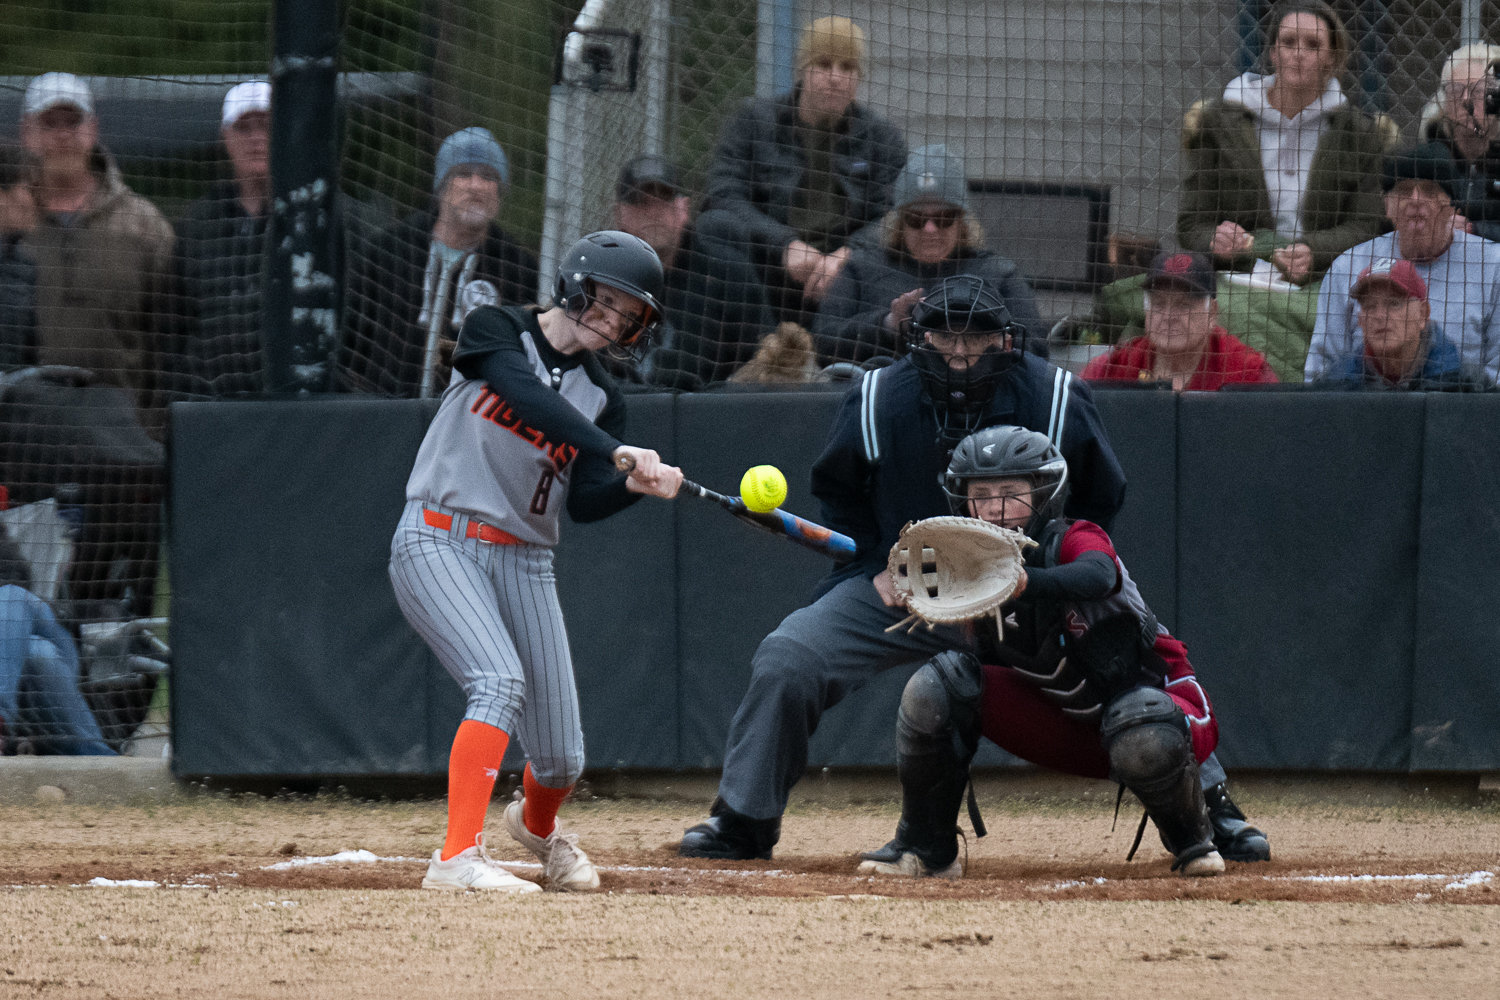 Gracie Schofield drills a 2-RBI double to deep center to give Centralia the lead in its 5-3 win over W.F. West on March 28.